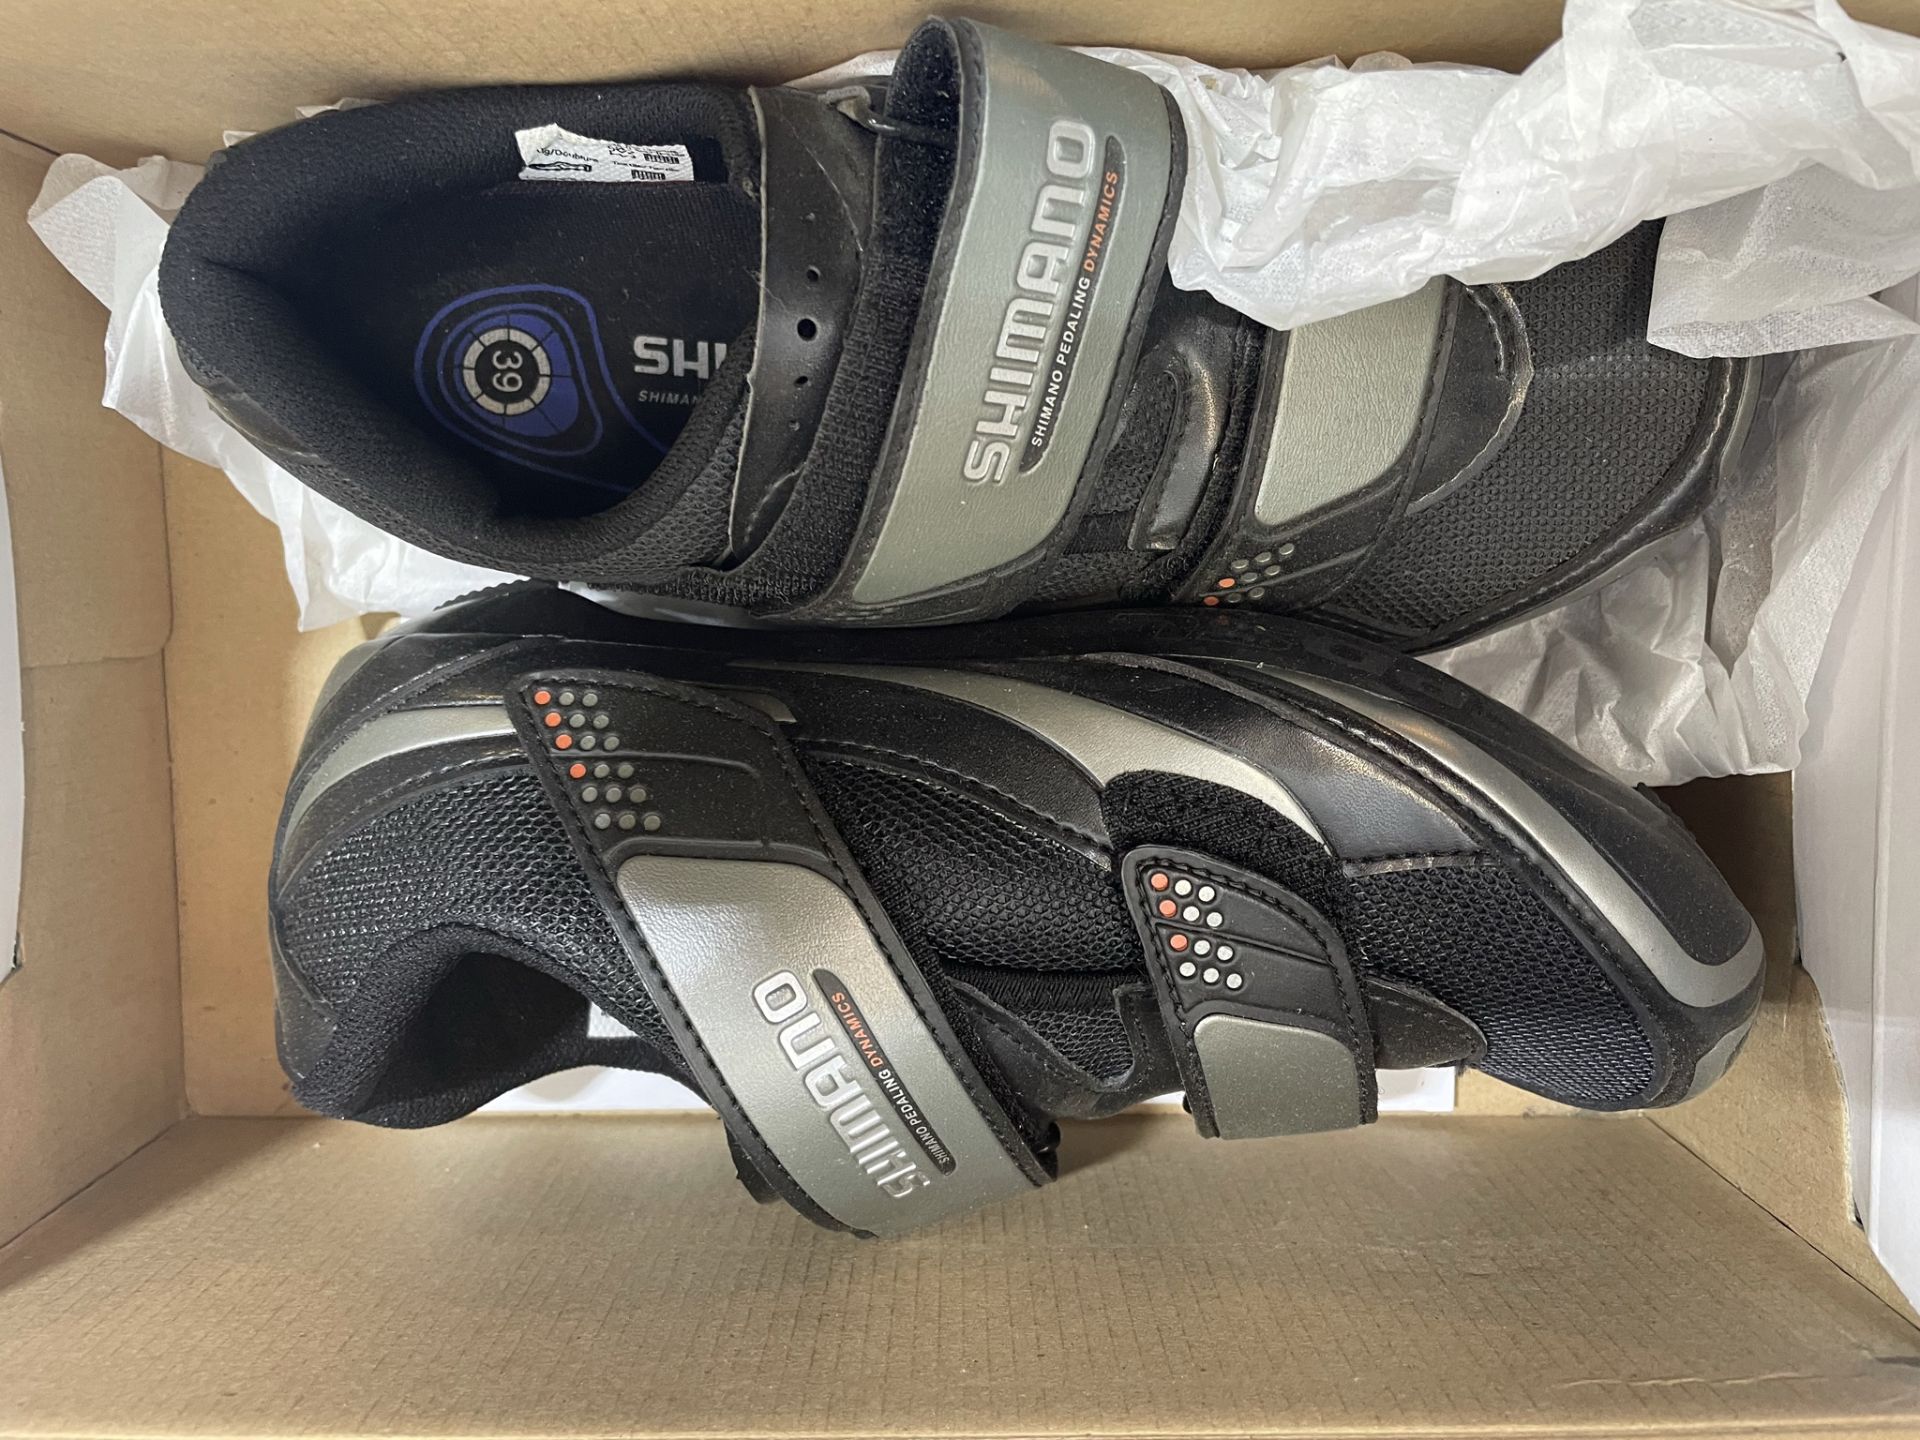 Shimano SH-R064 Cycling Shoes in Black | Size EUR39 - Image 3 of 3